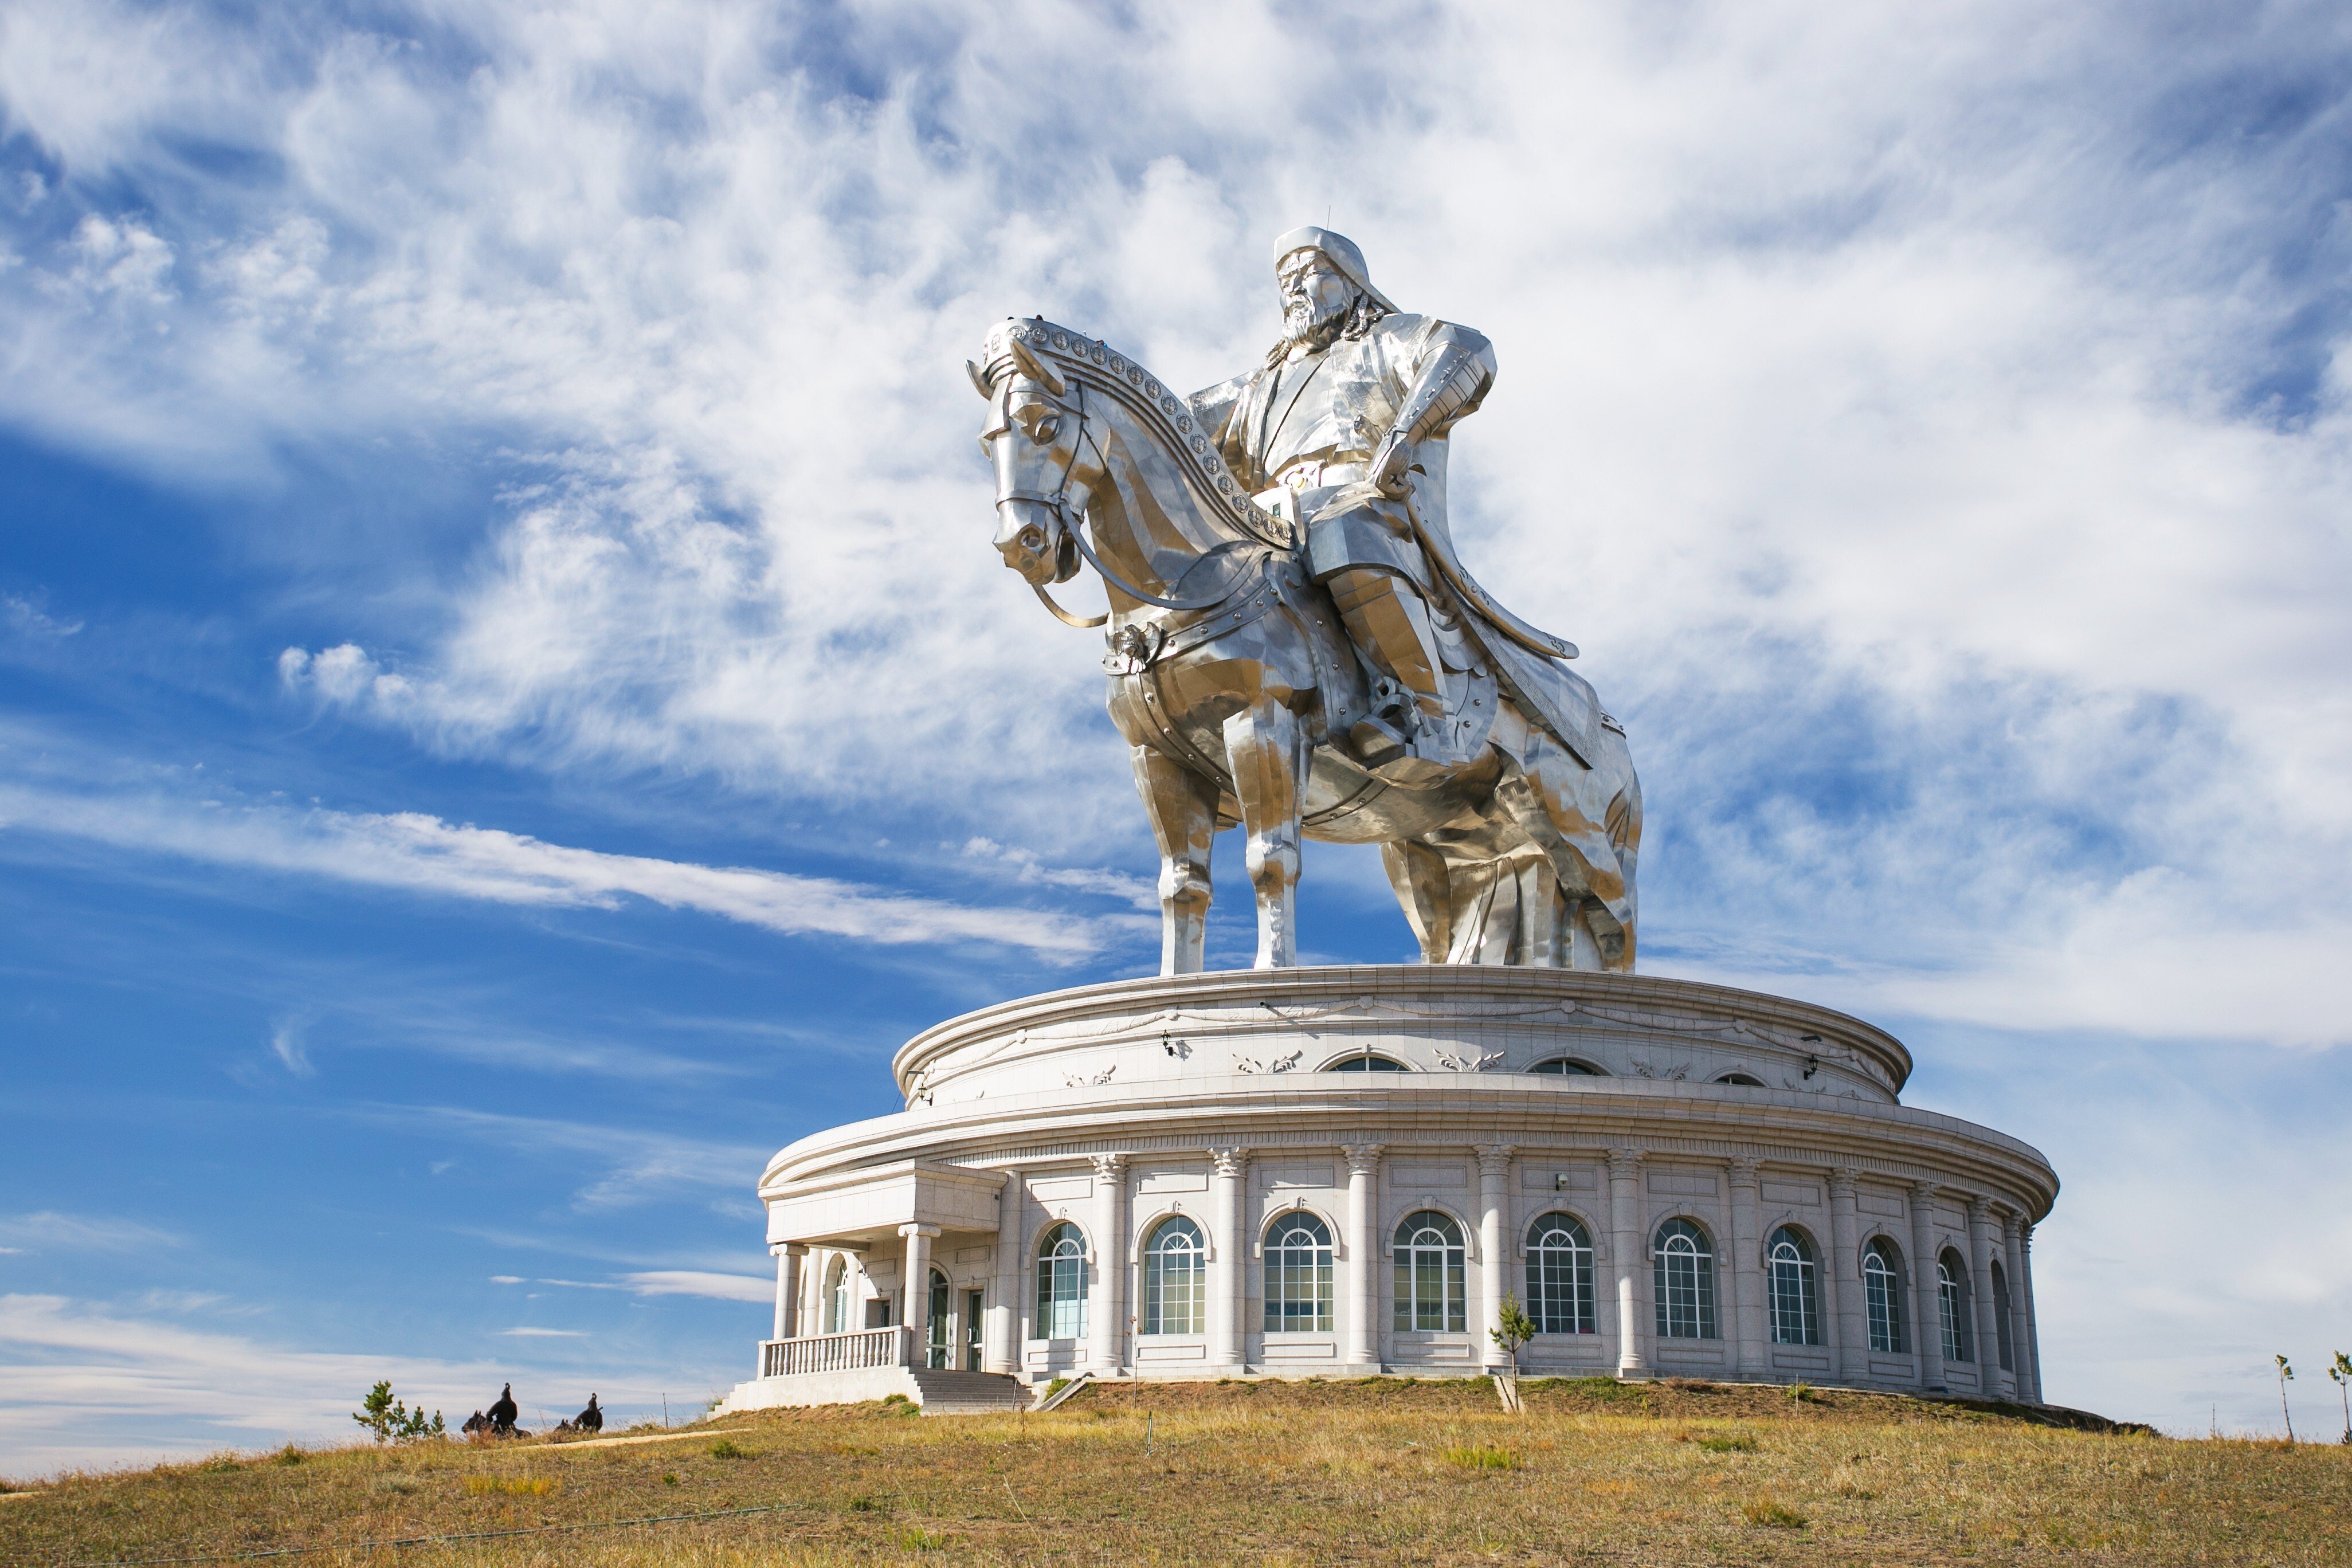 A statue of Genghis Khan in Mongolia. Photo: Shutterstock